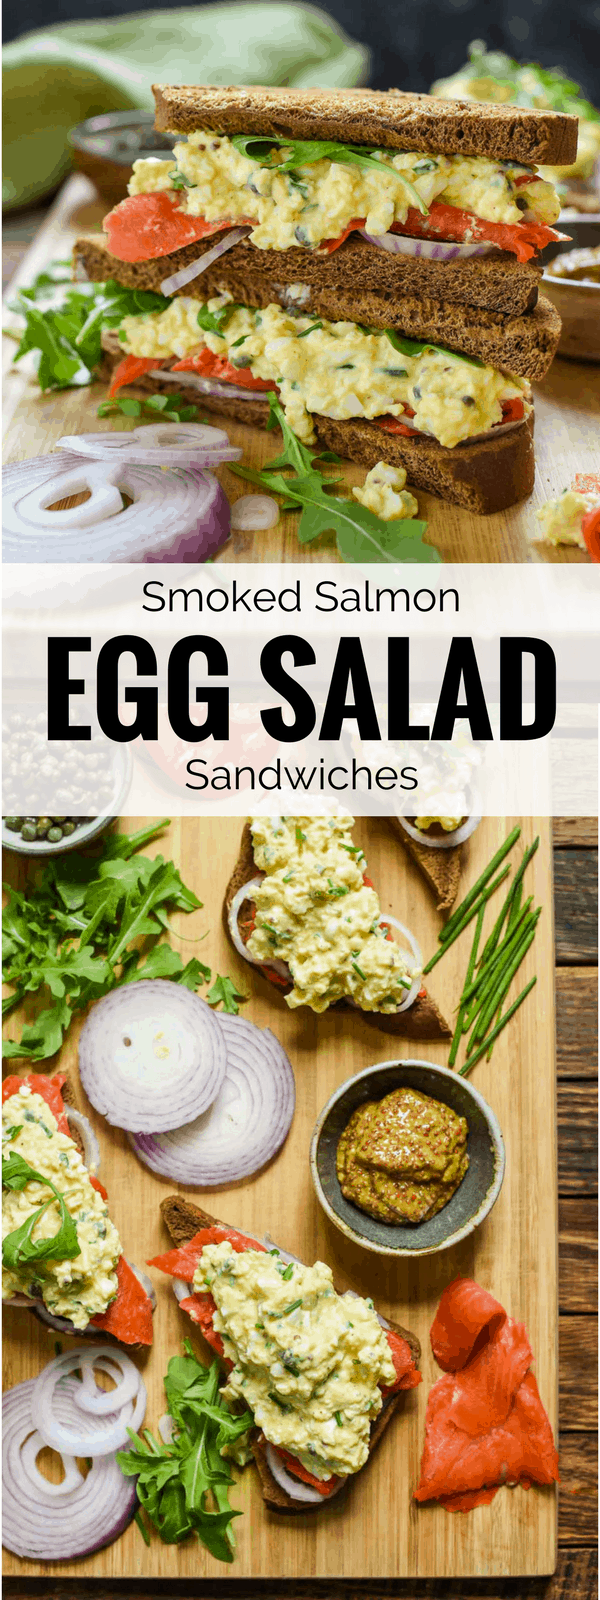 These Smoked Salmon Egg Salad Sandwiches are perfect for spring brunches or quick lunches. Packed with protein and fresh, herby, smoky flavor, everyone will love these!